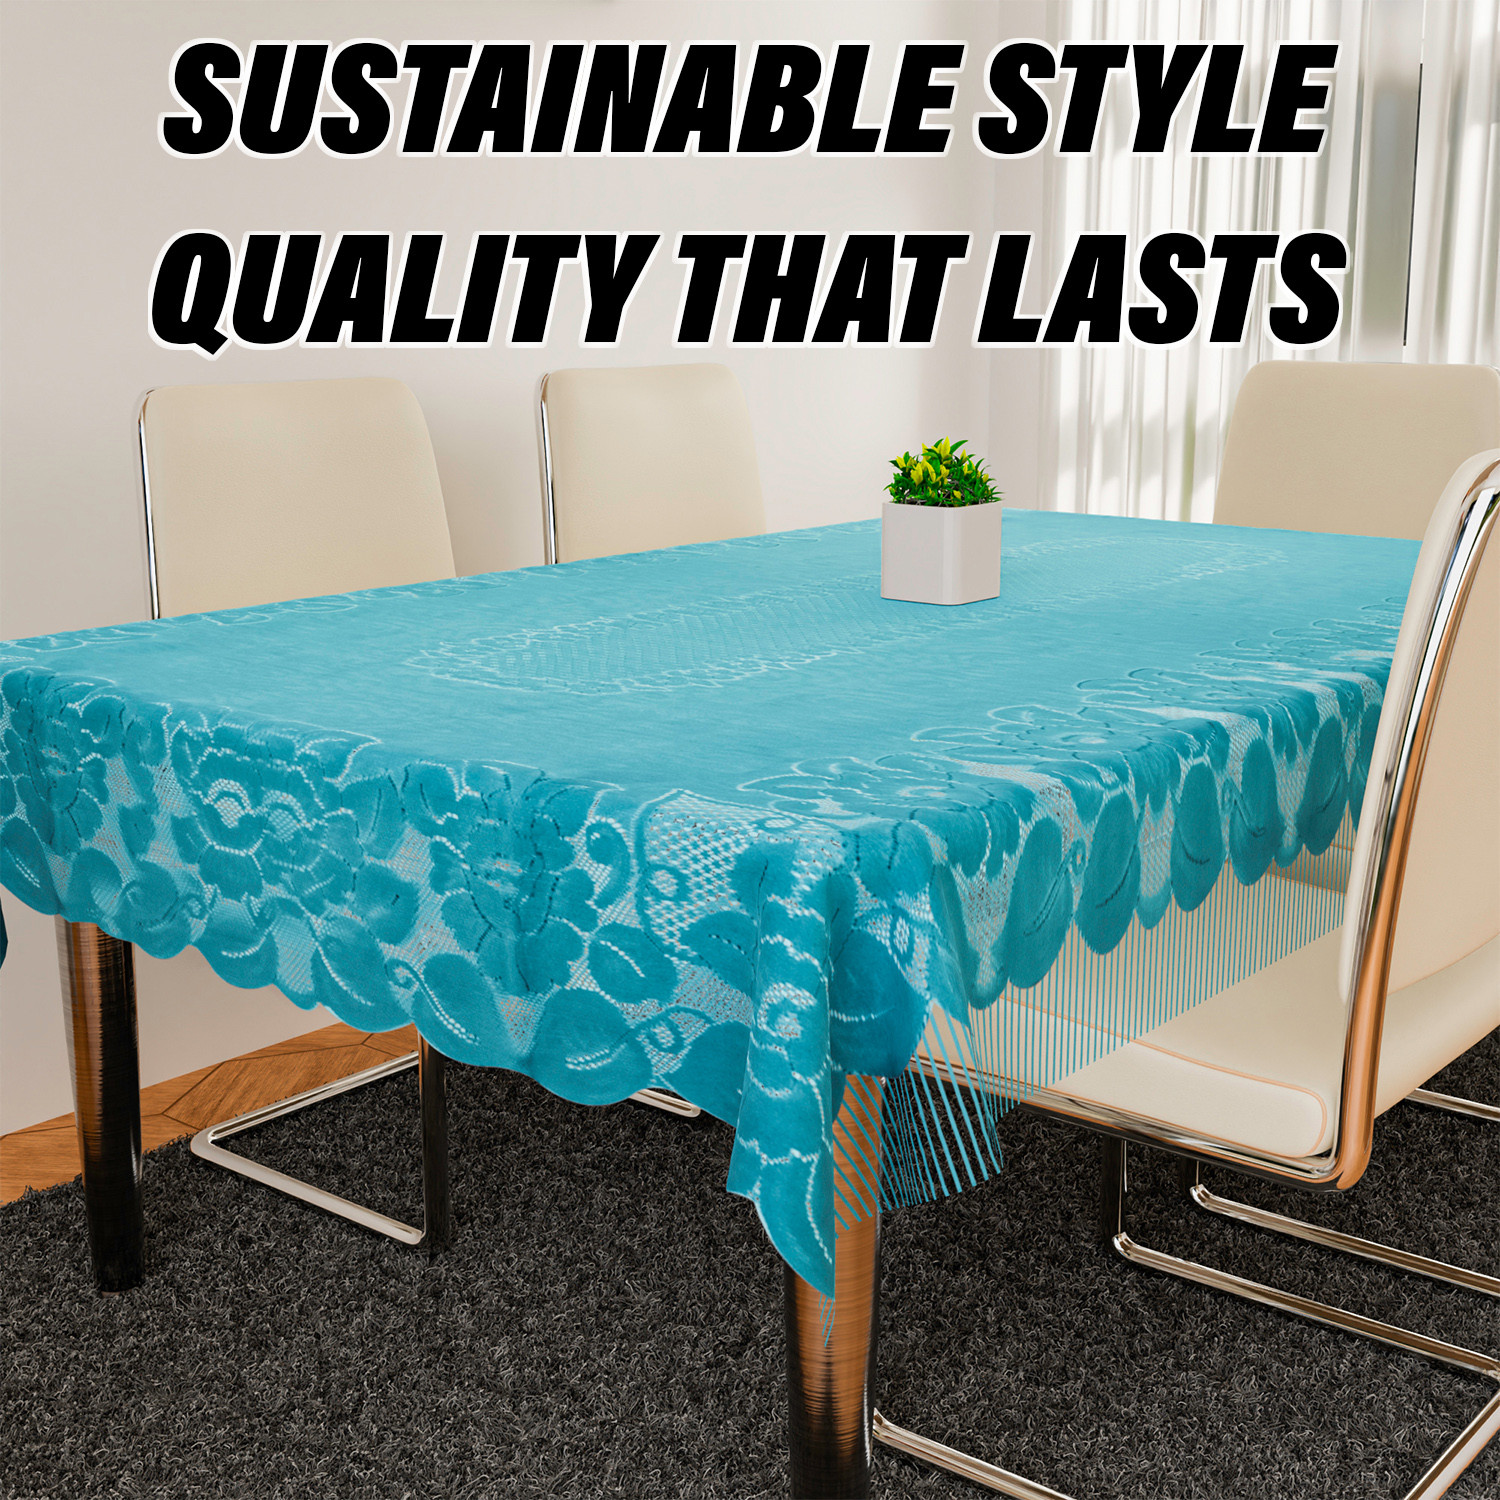 Kuber Industries Dining Table Cover | Net Table Cloth Cover | 6 Seater Table Cloth | Jhalar Table Cover | Table Protector | Table Cover for Dining Table | 60x90 Inch | DTC | Green